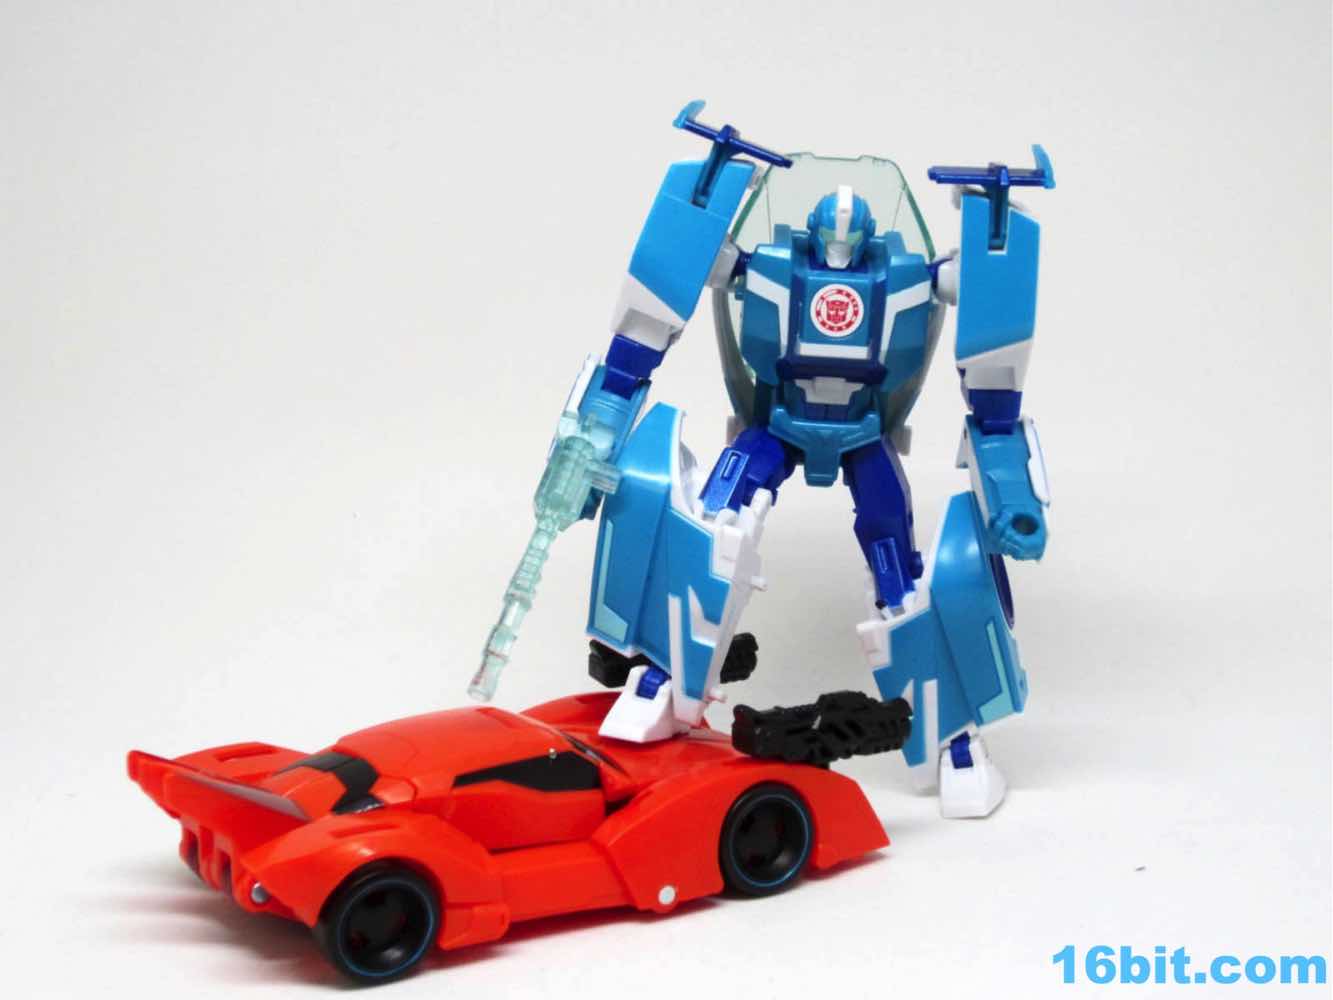 Transformers Robots in Disguise 2015 Blurr Action Figure for sale online